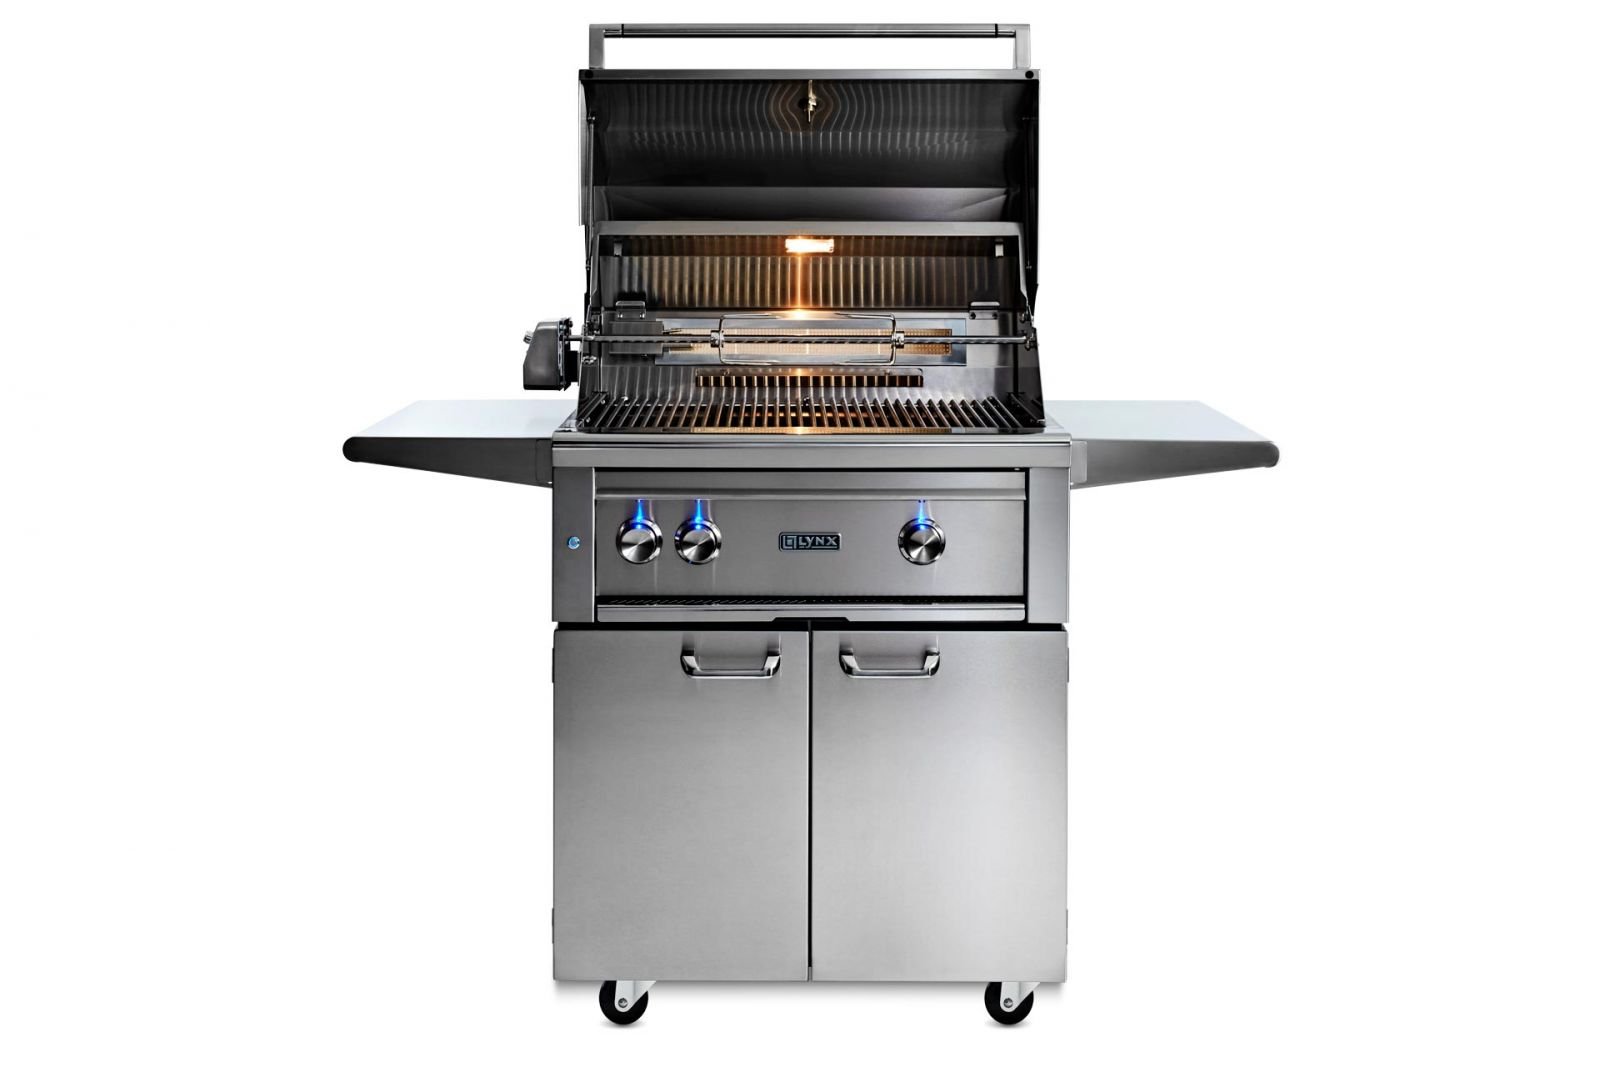 Lynx 30" Professional Freestanding Grill with All Trident Infrared Burners and Rotisserie (L30ATRF)